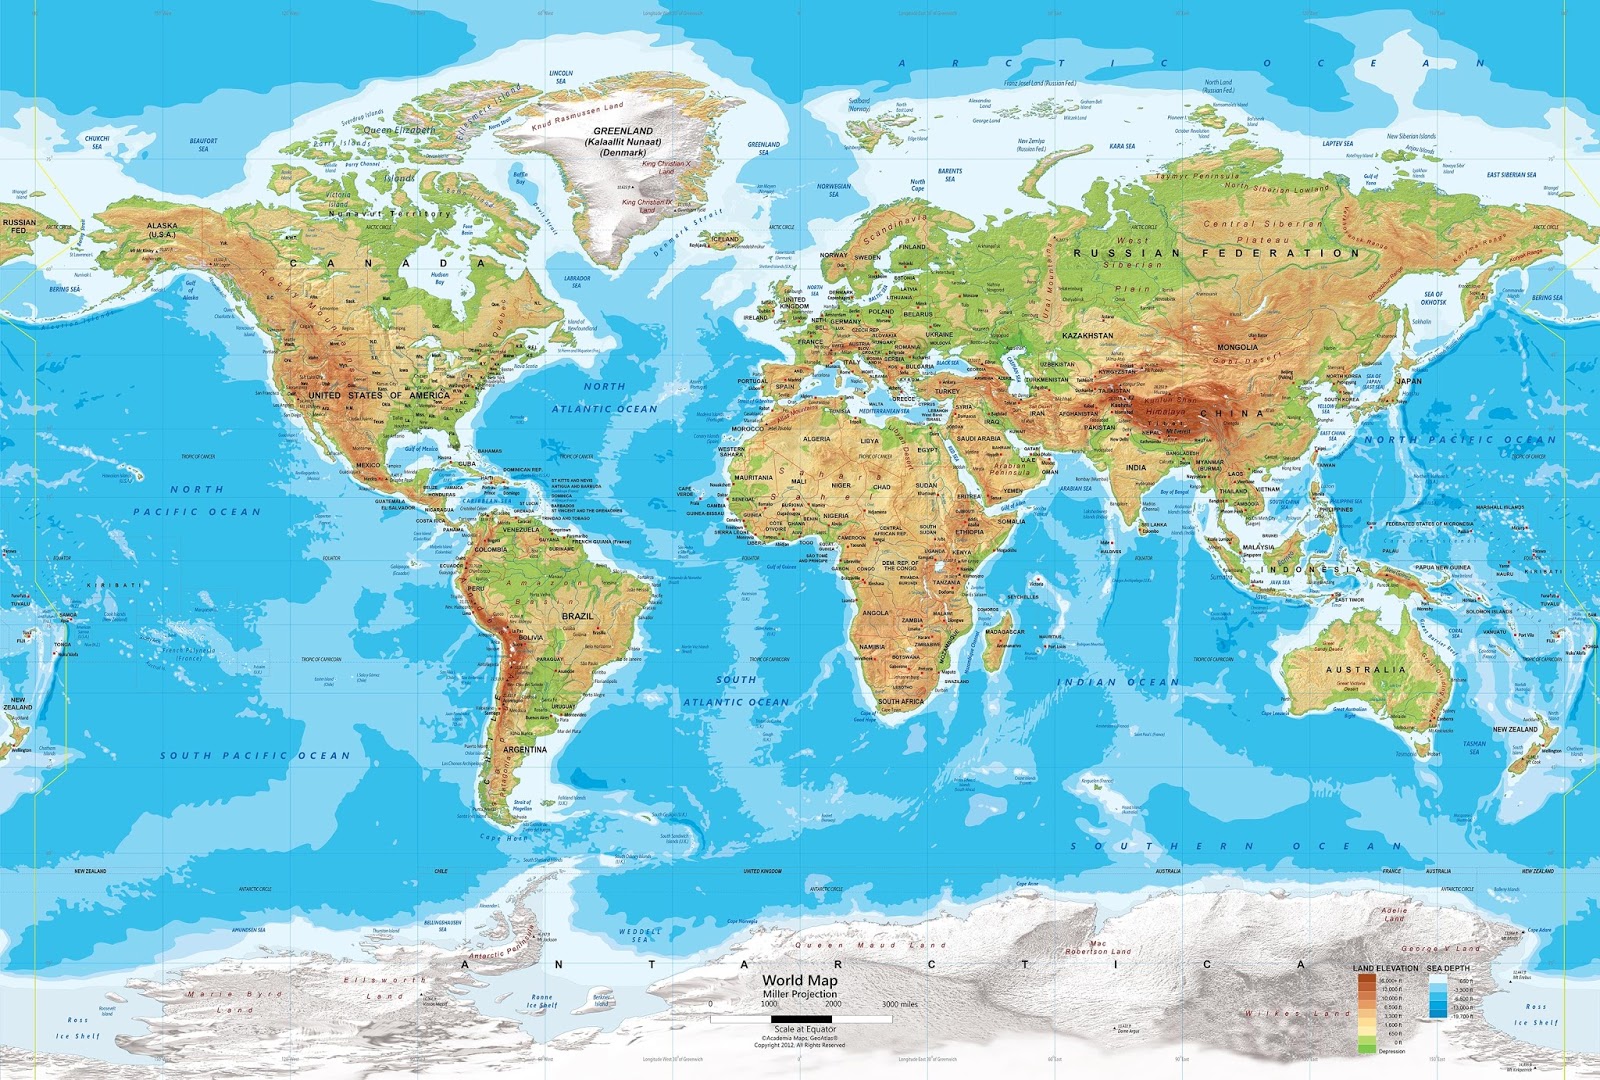 The world map pdf- Reducing complexity of reading the world map